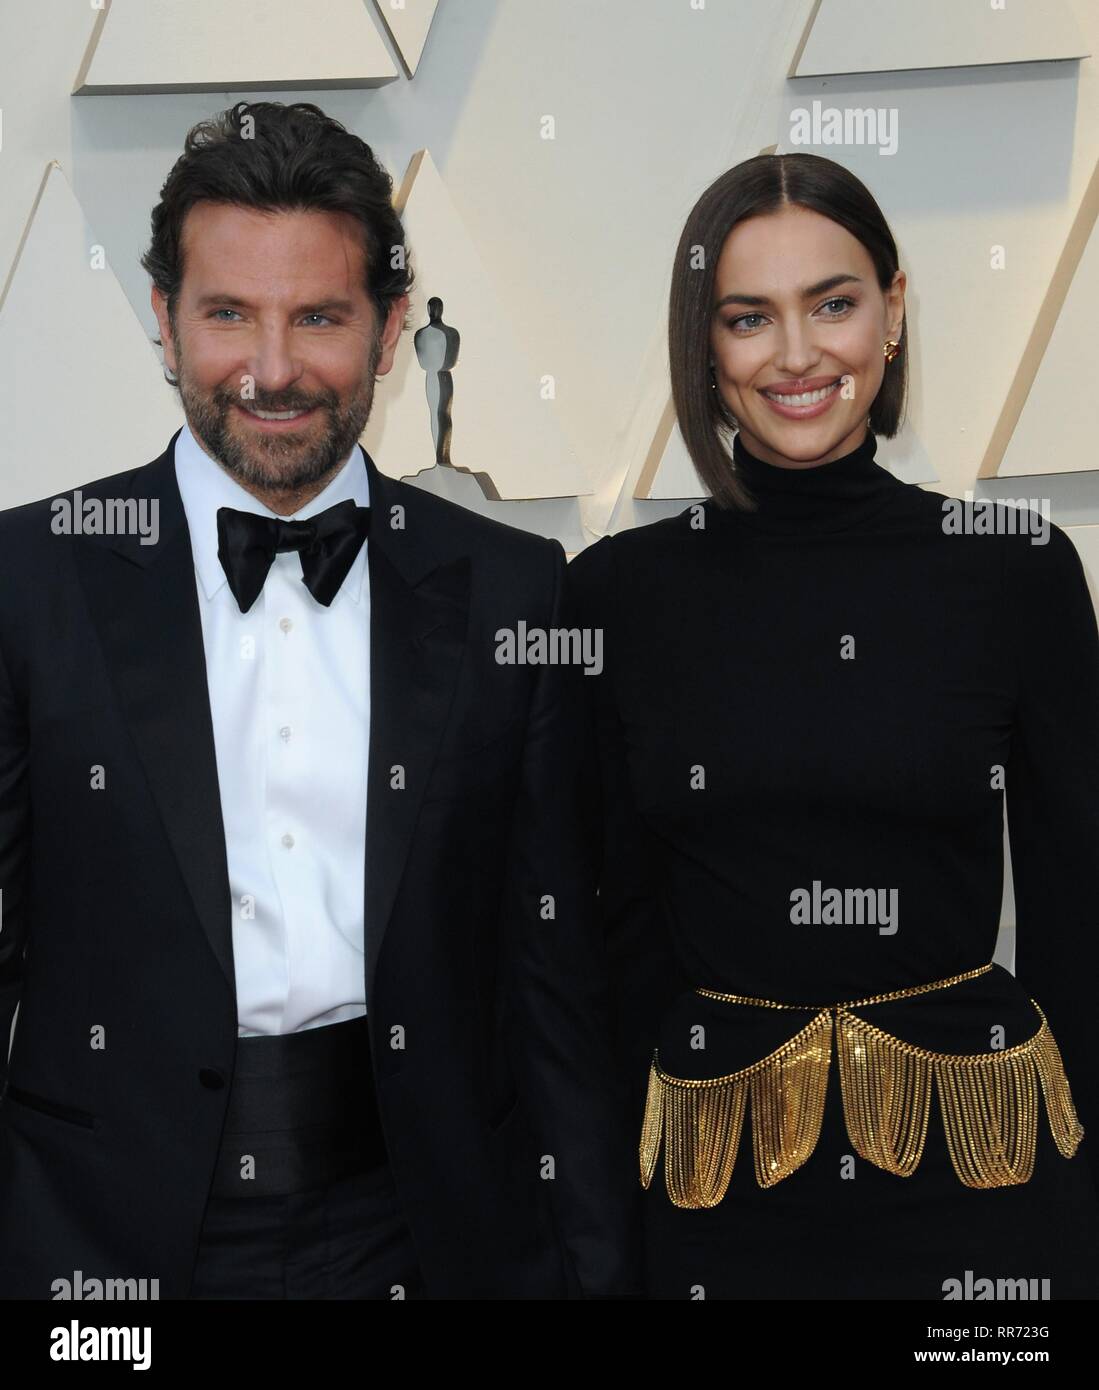 Los Angeles, CA, USA. 24th Feb, 2019. Bradley Cooper, Irina Shayk at arrivals for The 91st Academy Awards - Arrivals 3, The Dolby Theatre at Hollywood and Highland Center, Los Angeles, CA February 24, 2019. Credit: Elizabeth Goodenough/Everett Collection/Alamy Live News Stock Photo